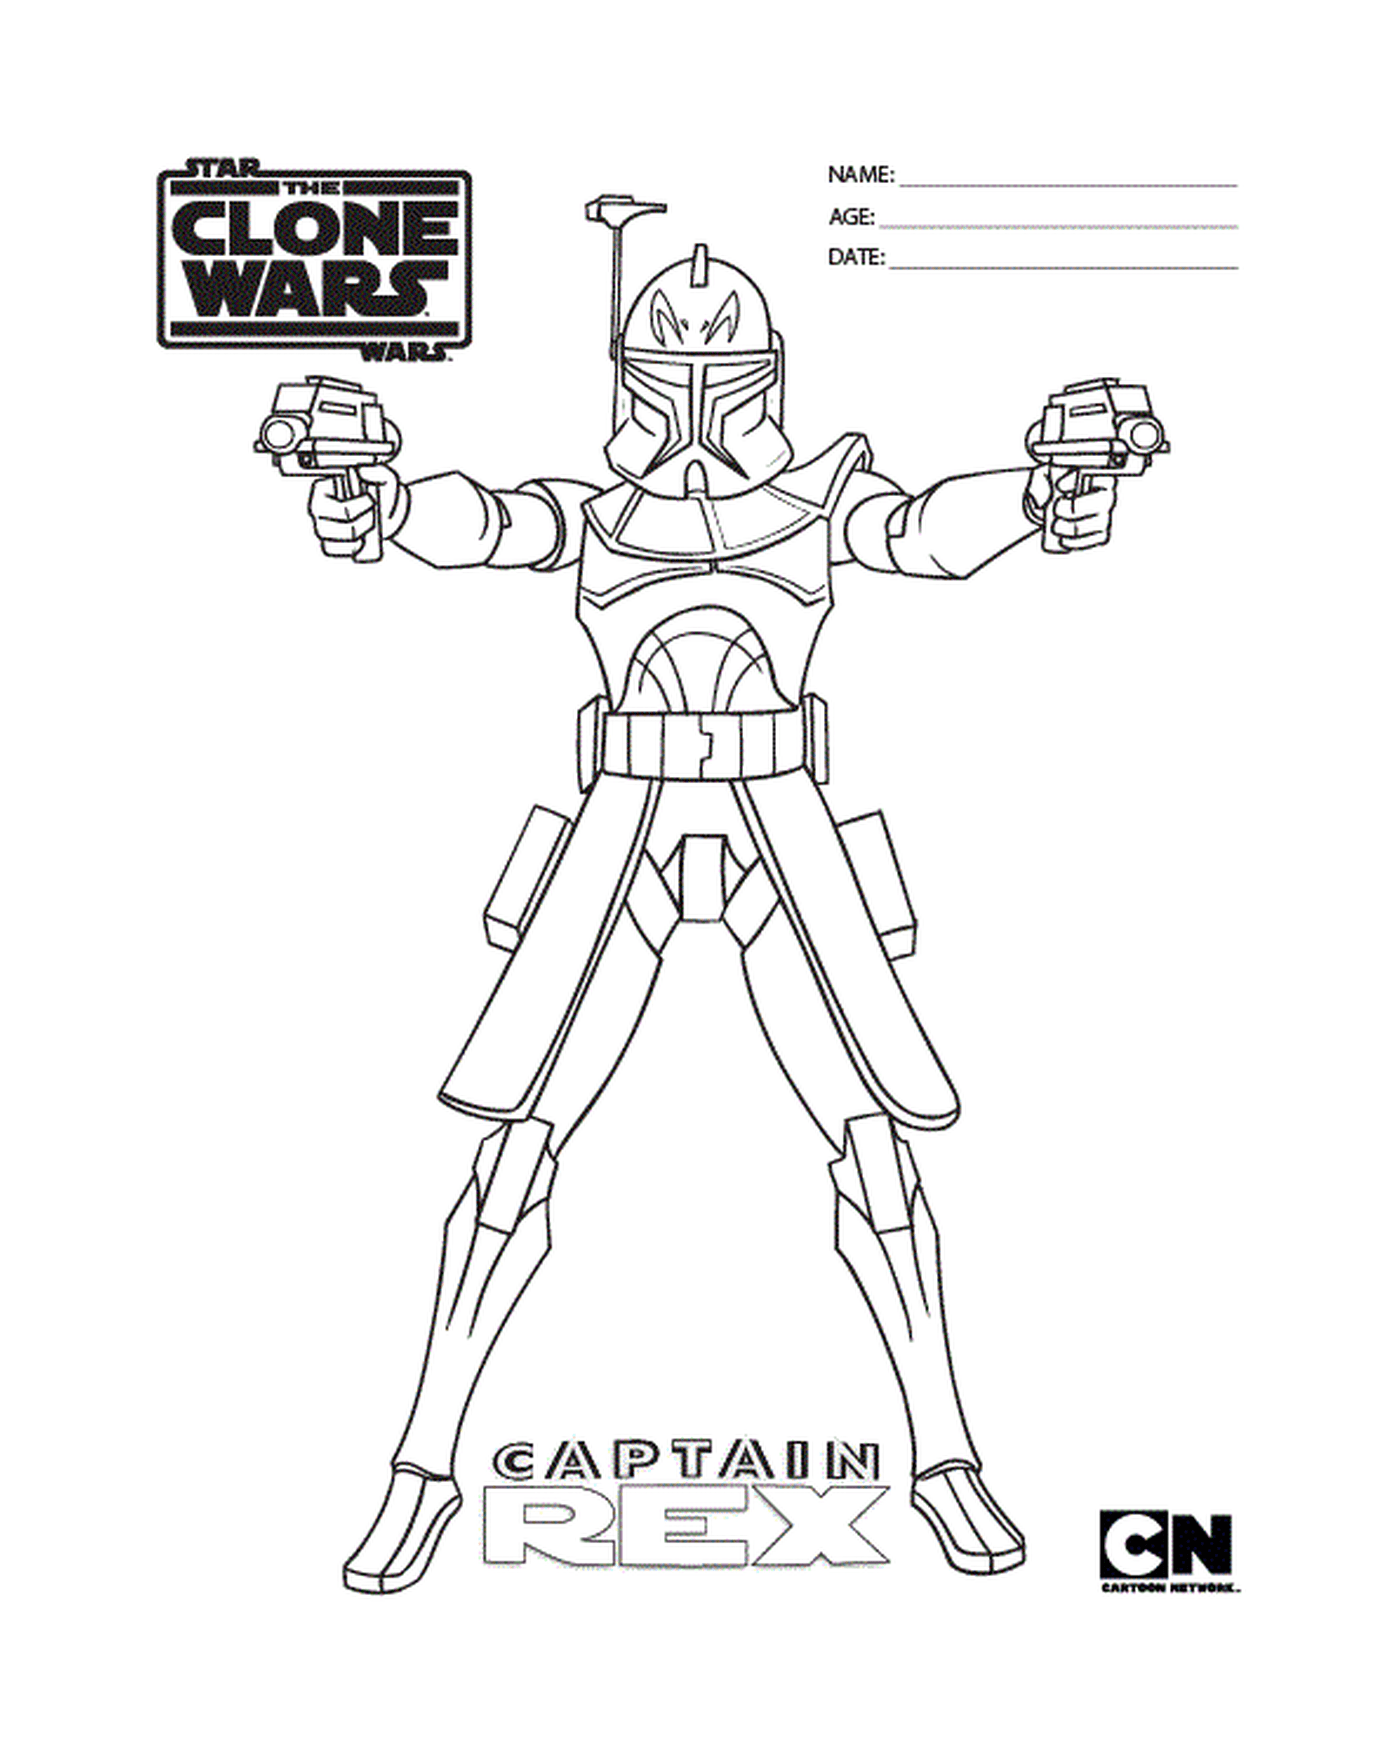  Star Wars character holding two pistols 